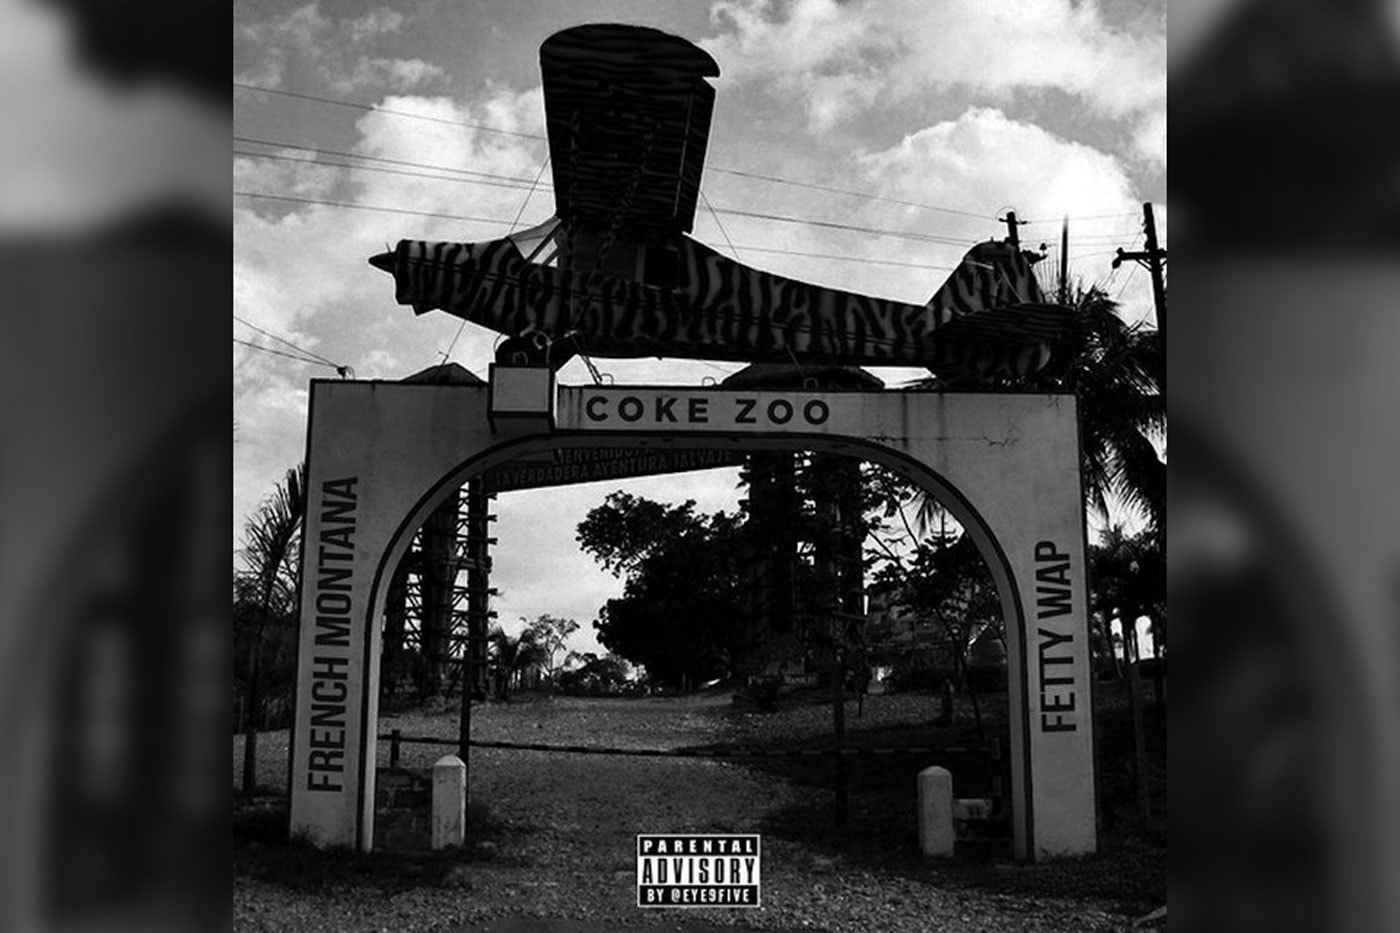 Fetty Wap and French Montana to Release a Collabo Project, "Coke Zoo"